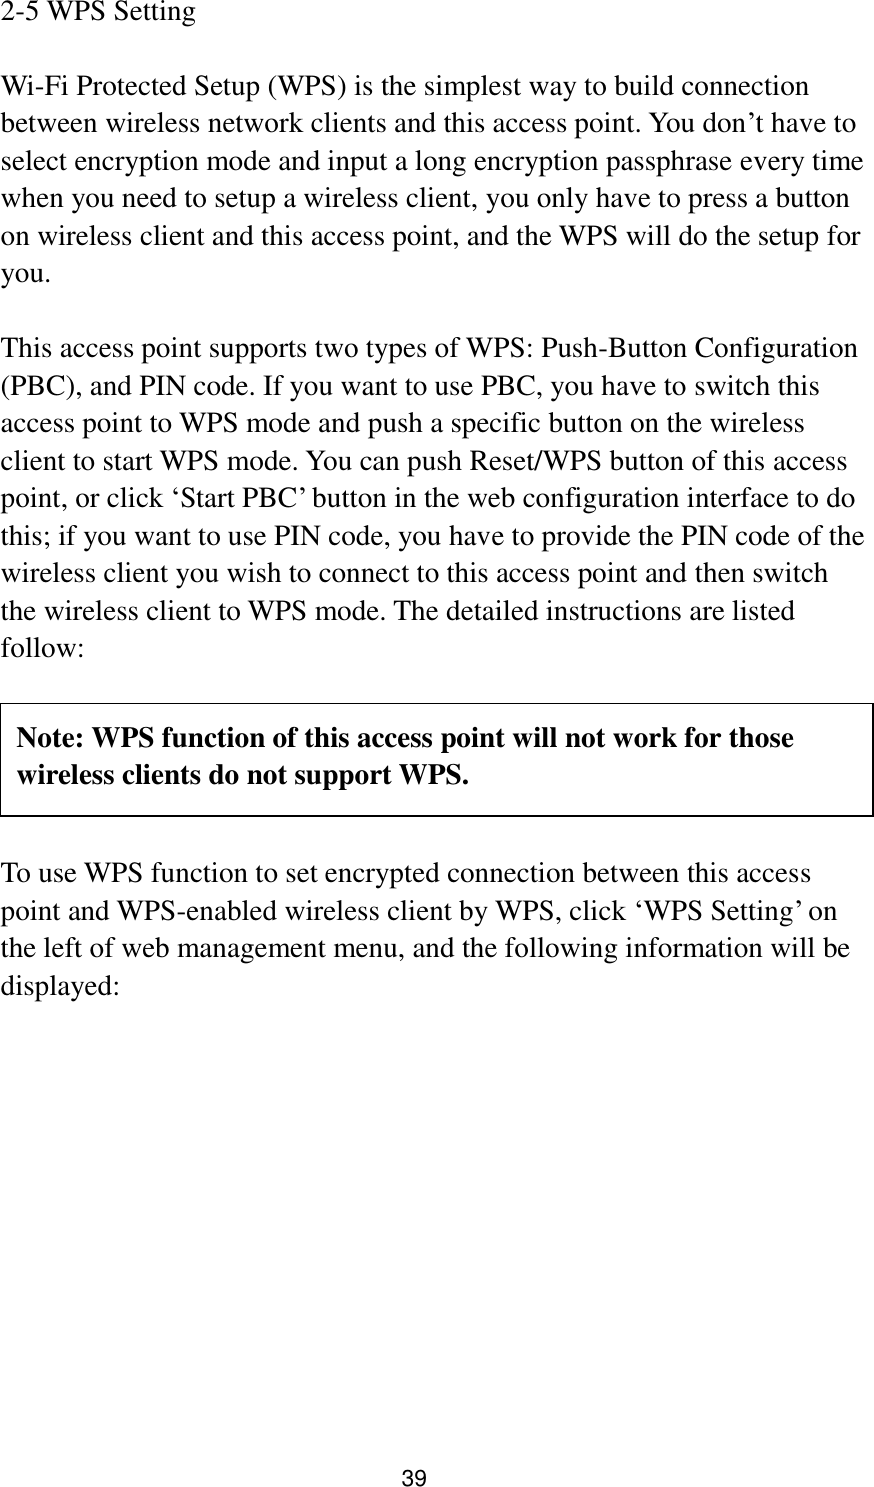 39 2-5 WPS Setting  Wi-Fi Protected Setup (WPS) is the simplest way to build connection between wireless network clients and this access point. You don‟t have to select encryption mode and input a long encryption passphrase every time when you need to setup a wireless client, you only have to press a button on wireless client and this access point, and the WPS will do the setup for you.  This access point supports two types of WPS: Push-Button Configuration (PBC), and PIN code. If you want to use PBC, you have to switch this access point to WPS mode and push a specific button on the wireless client to start WPS mode. You can push Reset/WPS button of this access point, or click „Start PBC‟ button in the web configuration interface to do this; if you want to use PIN code, you have to provide the PIN code of the wireless client you wish to connect to this access point and then switch the wireless client to WPS mode. The detailed instructions are listed follow:      To use WPS function to set encrypted connection between this access point and WPS-enabled wireless client by WPS, click „WPS Setting‟ on the left of web management menu, and the following information will be displayed:  Note: WPS function of this access point will not work for those wireless clients do not support WPS. 